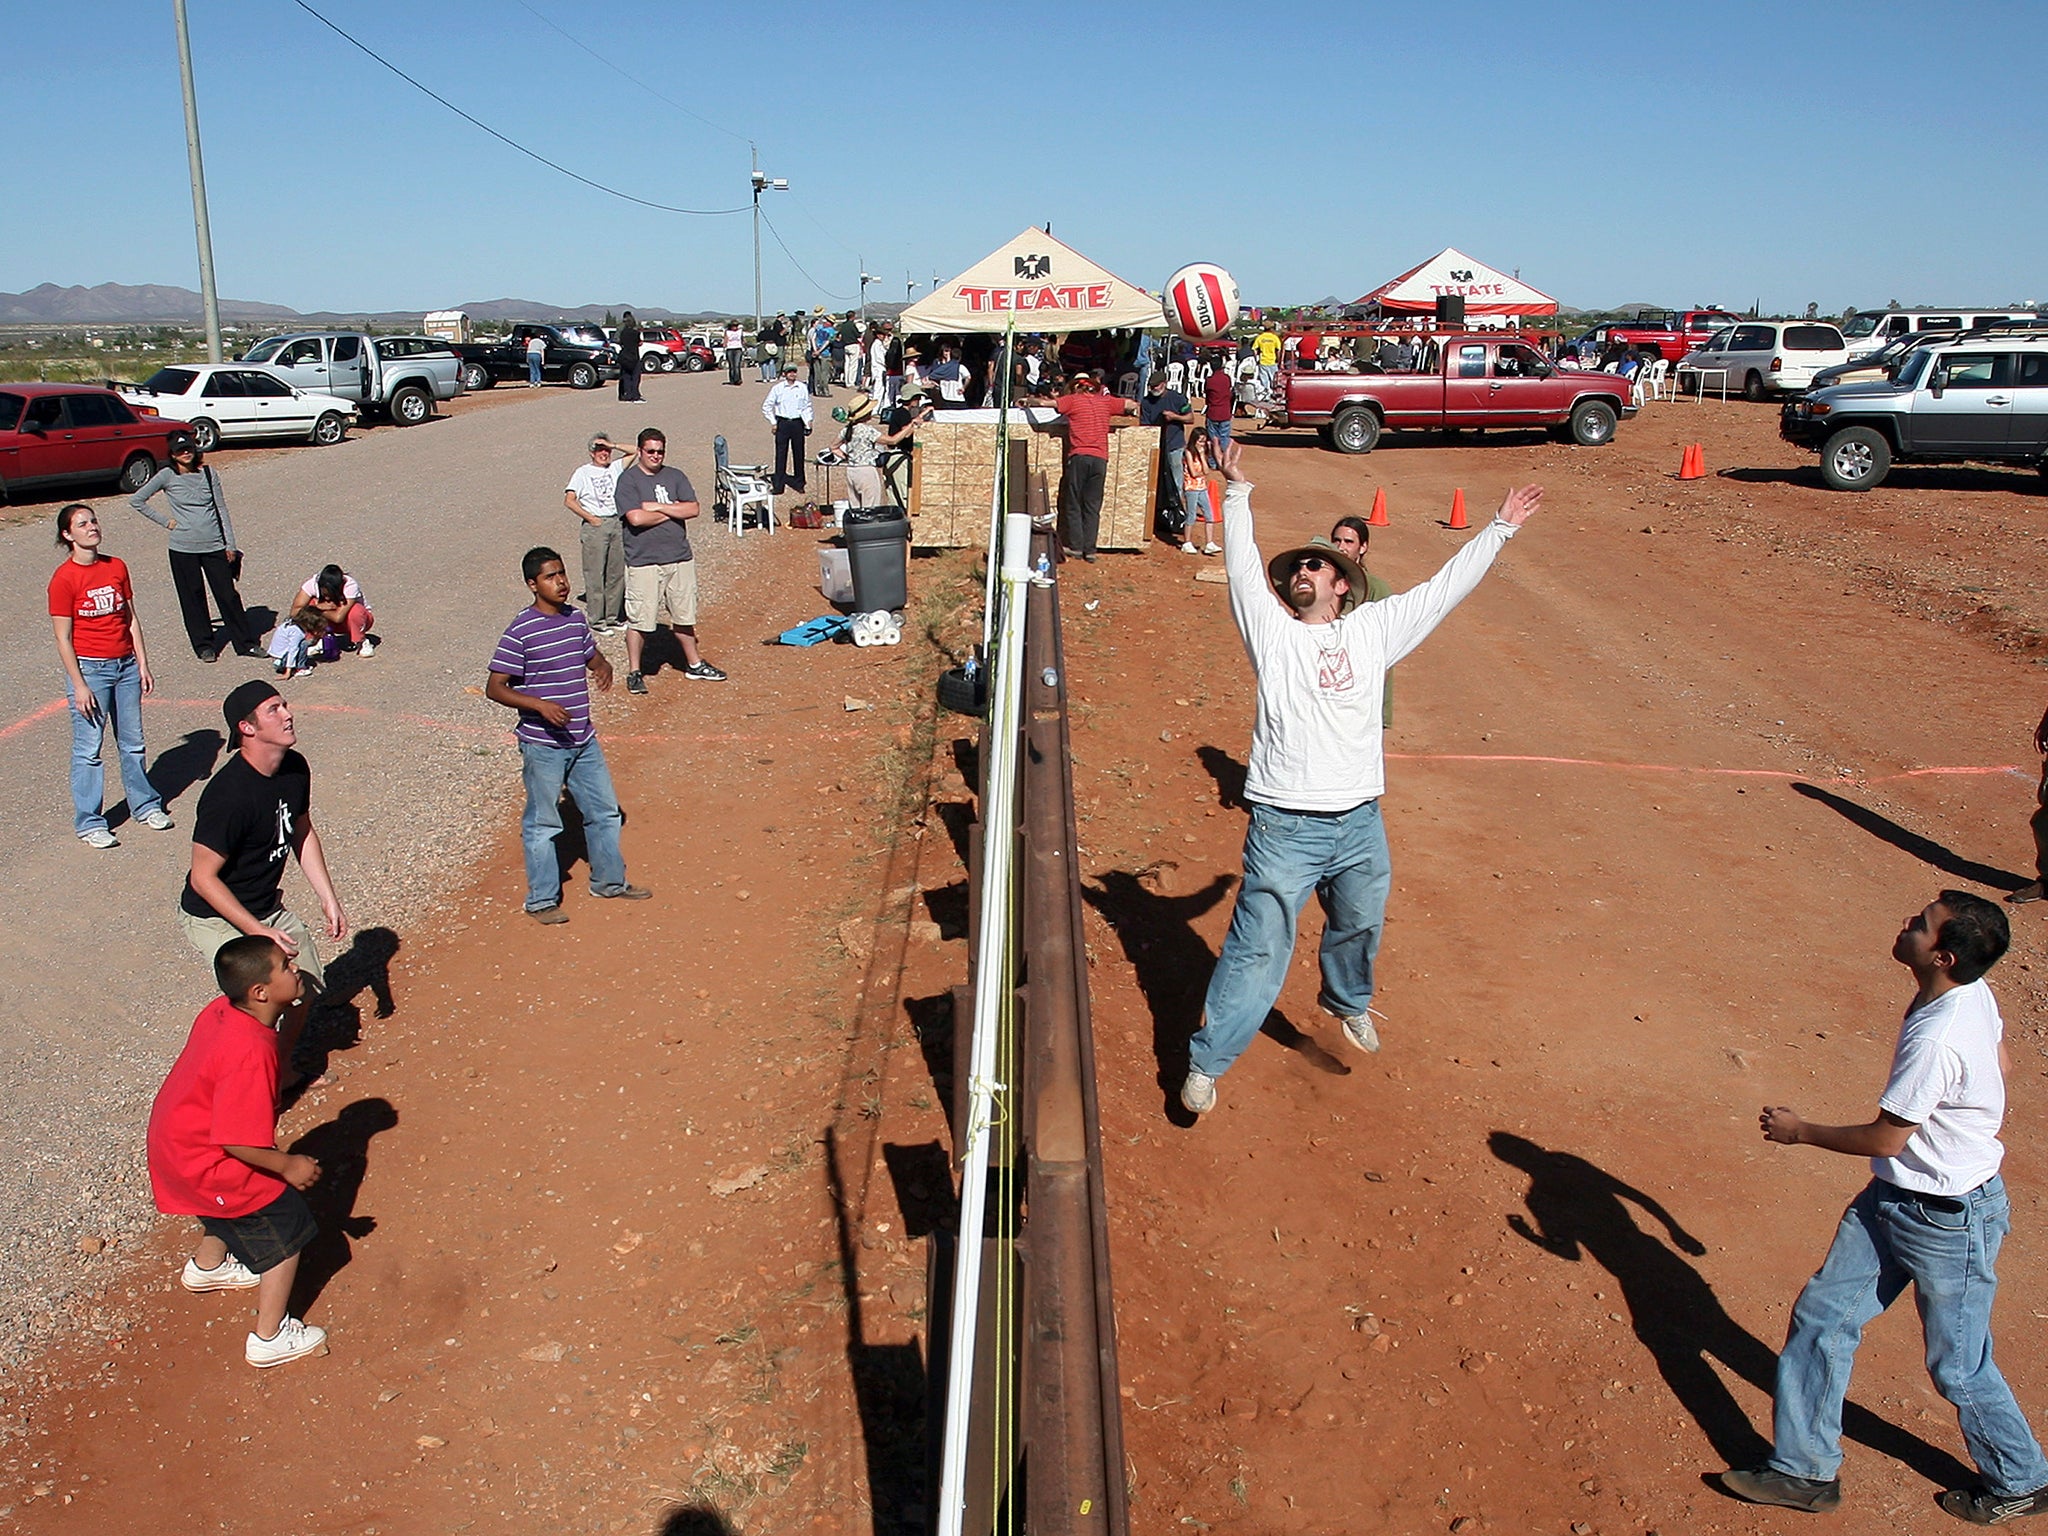 Wallyball has gained fame and is now an annual April tradition in Naco, Arizona and Naco, Sonora Mexico